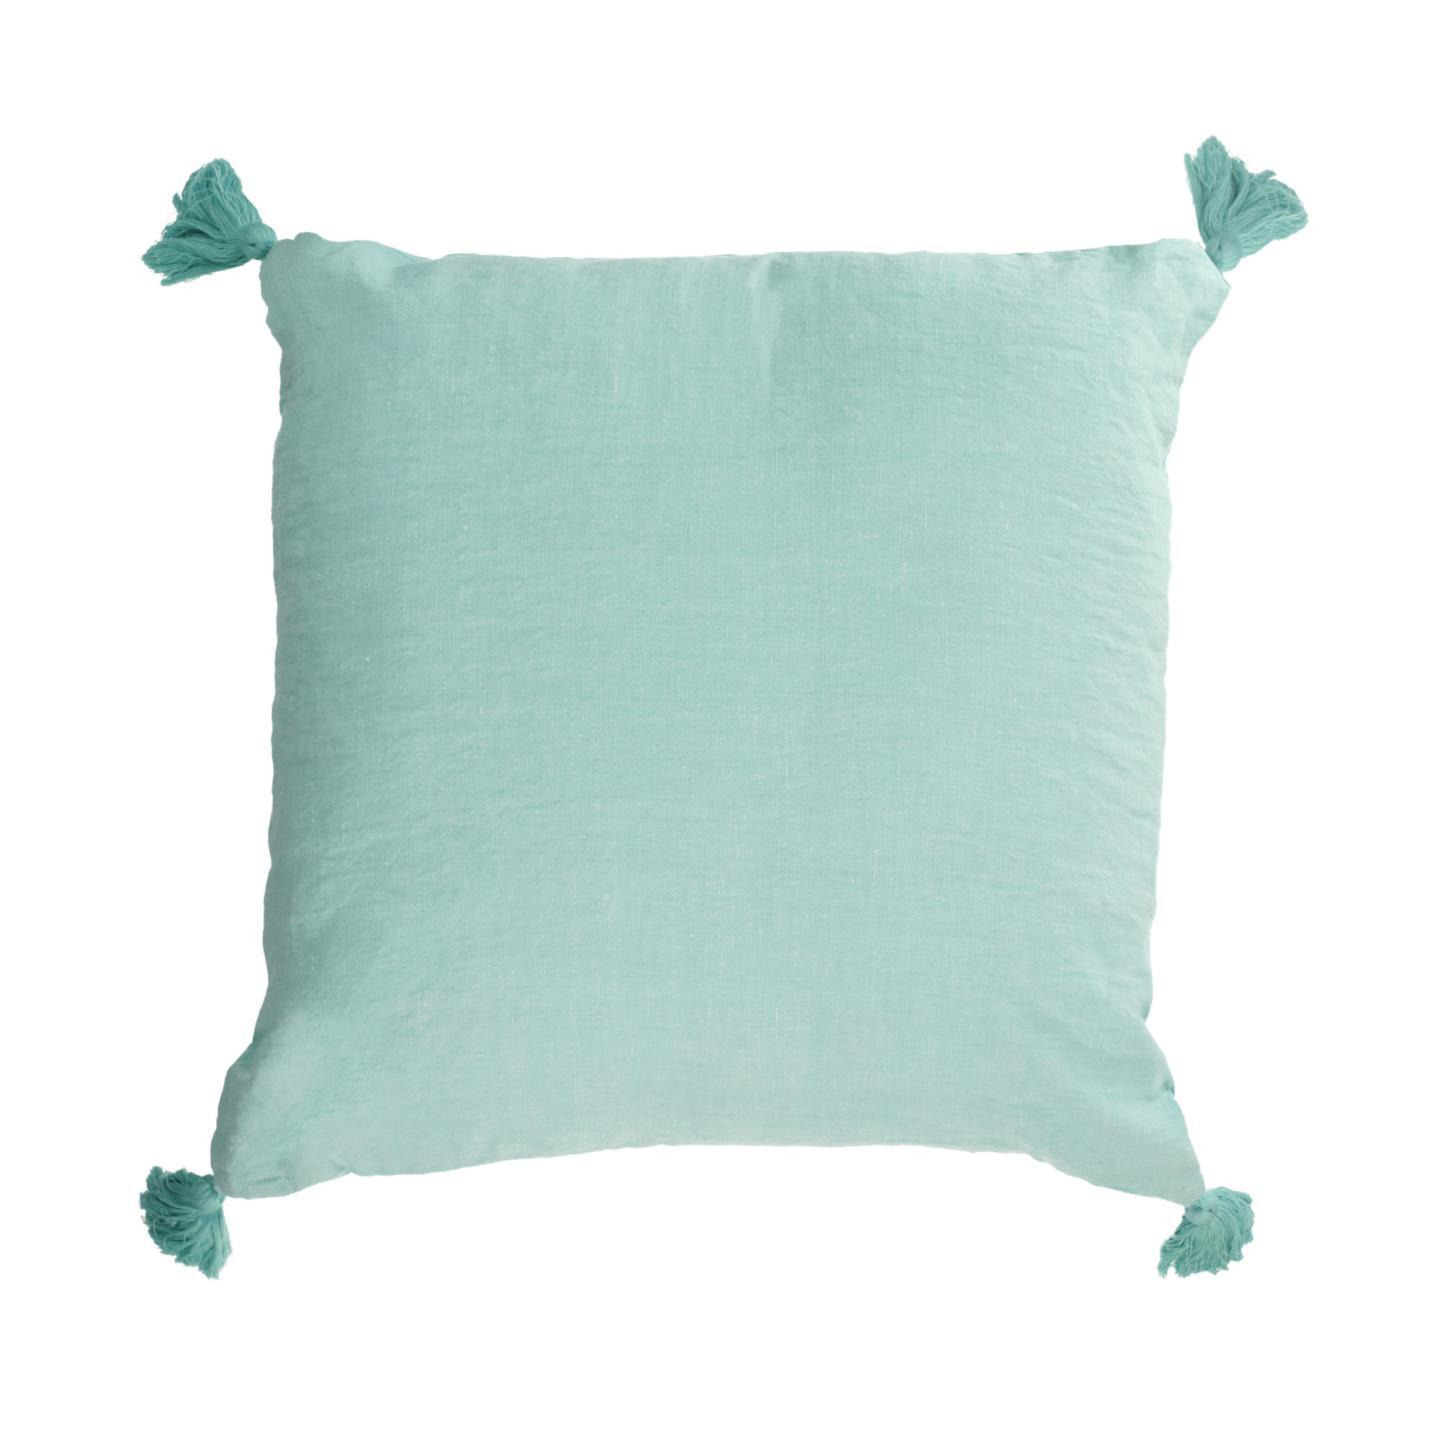 Eirenne cotton and linen cushion cover in turquoise 45 x 45 cm